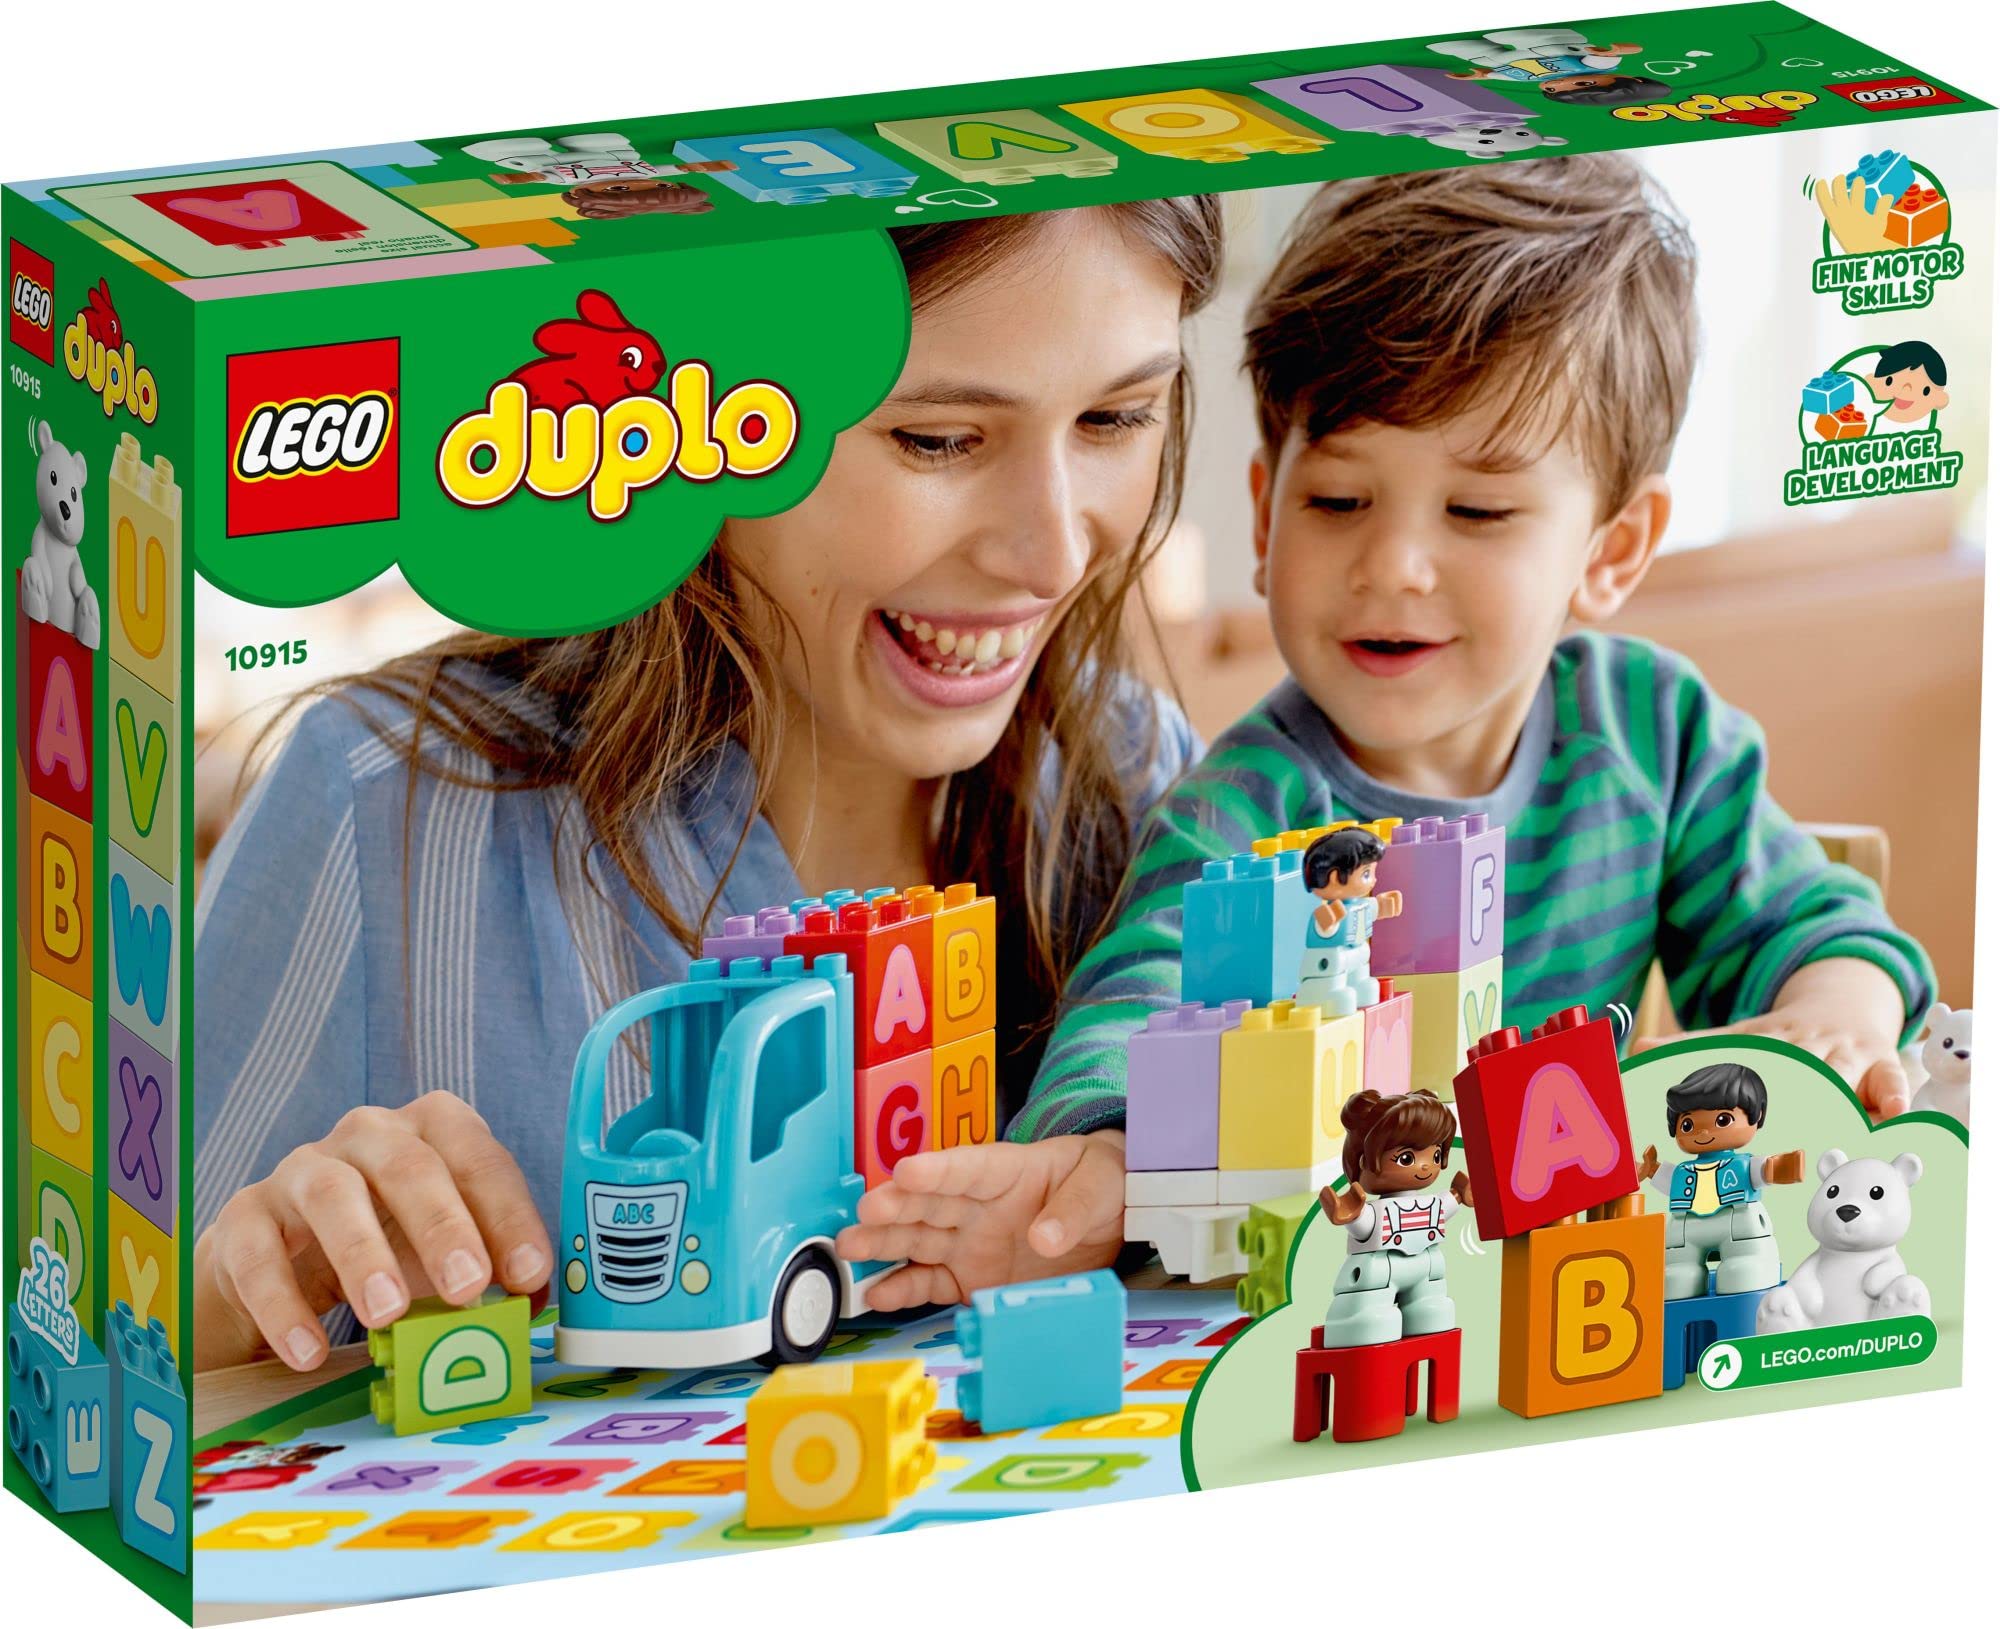 LEGO DUPLO My First Alphabet Truck 10915 ABC Letters Learning Toy for Toddlers, Fun Kids’ Educational Building Toy (36 Pieces)